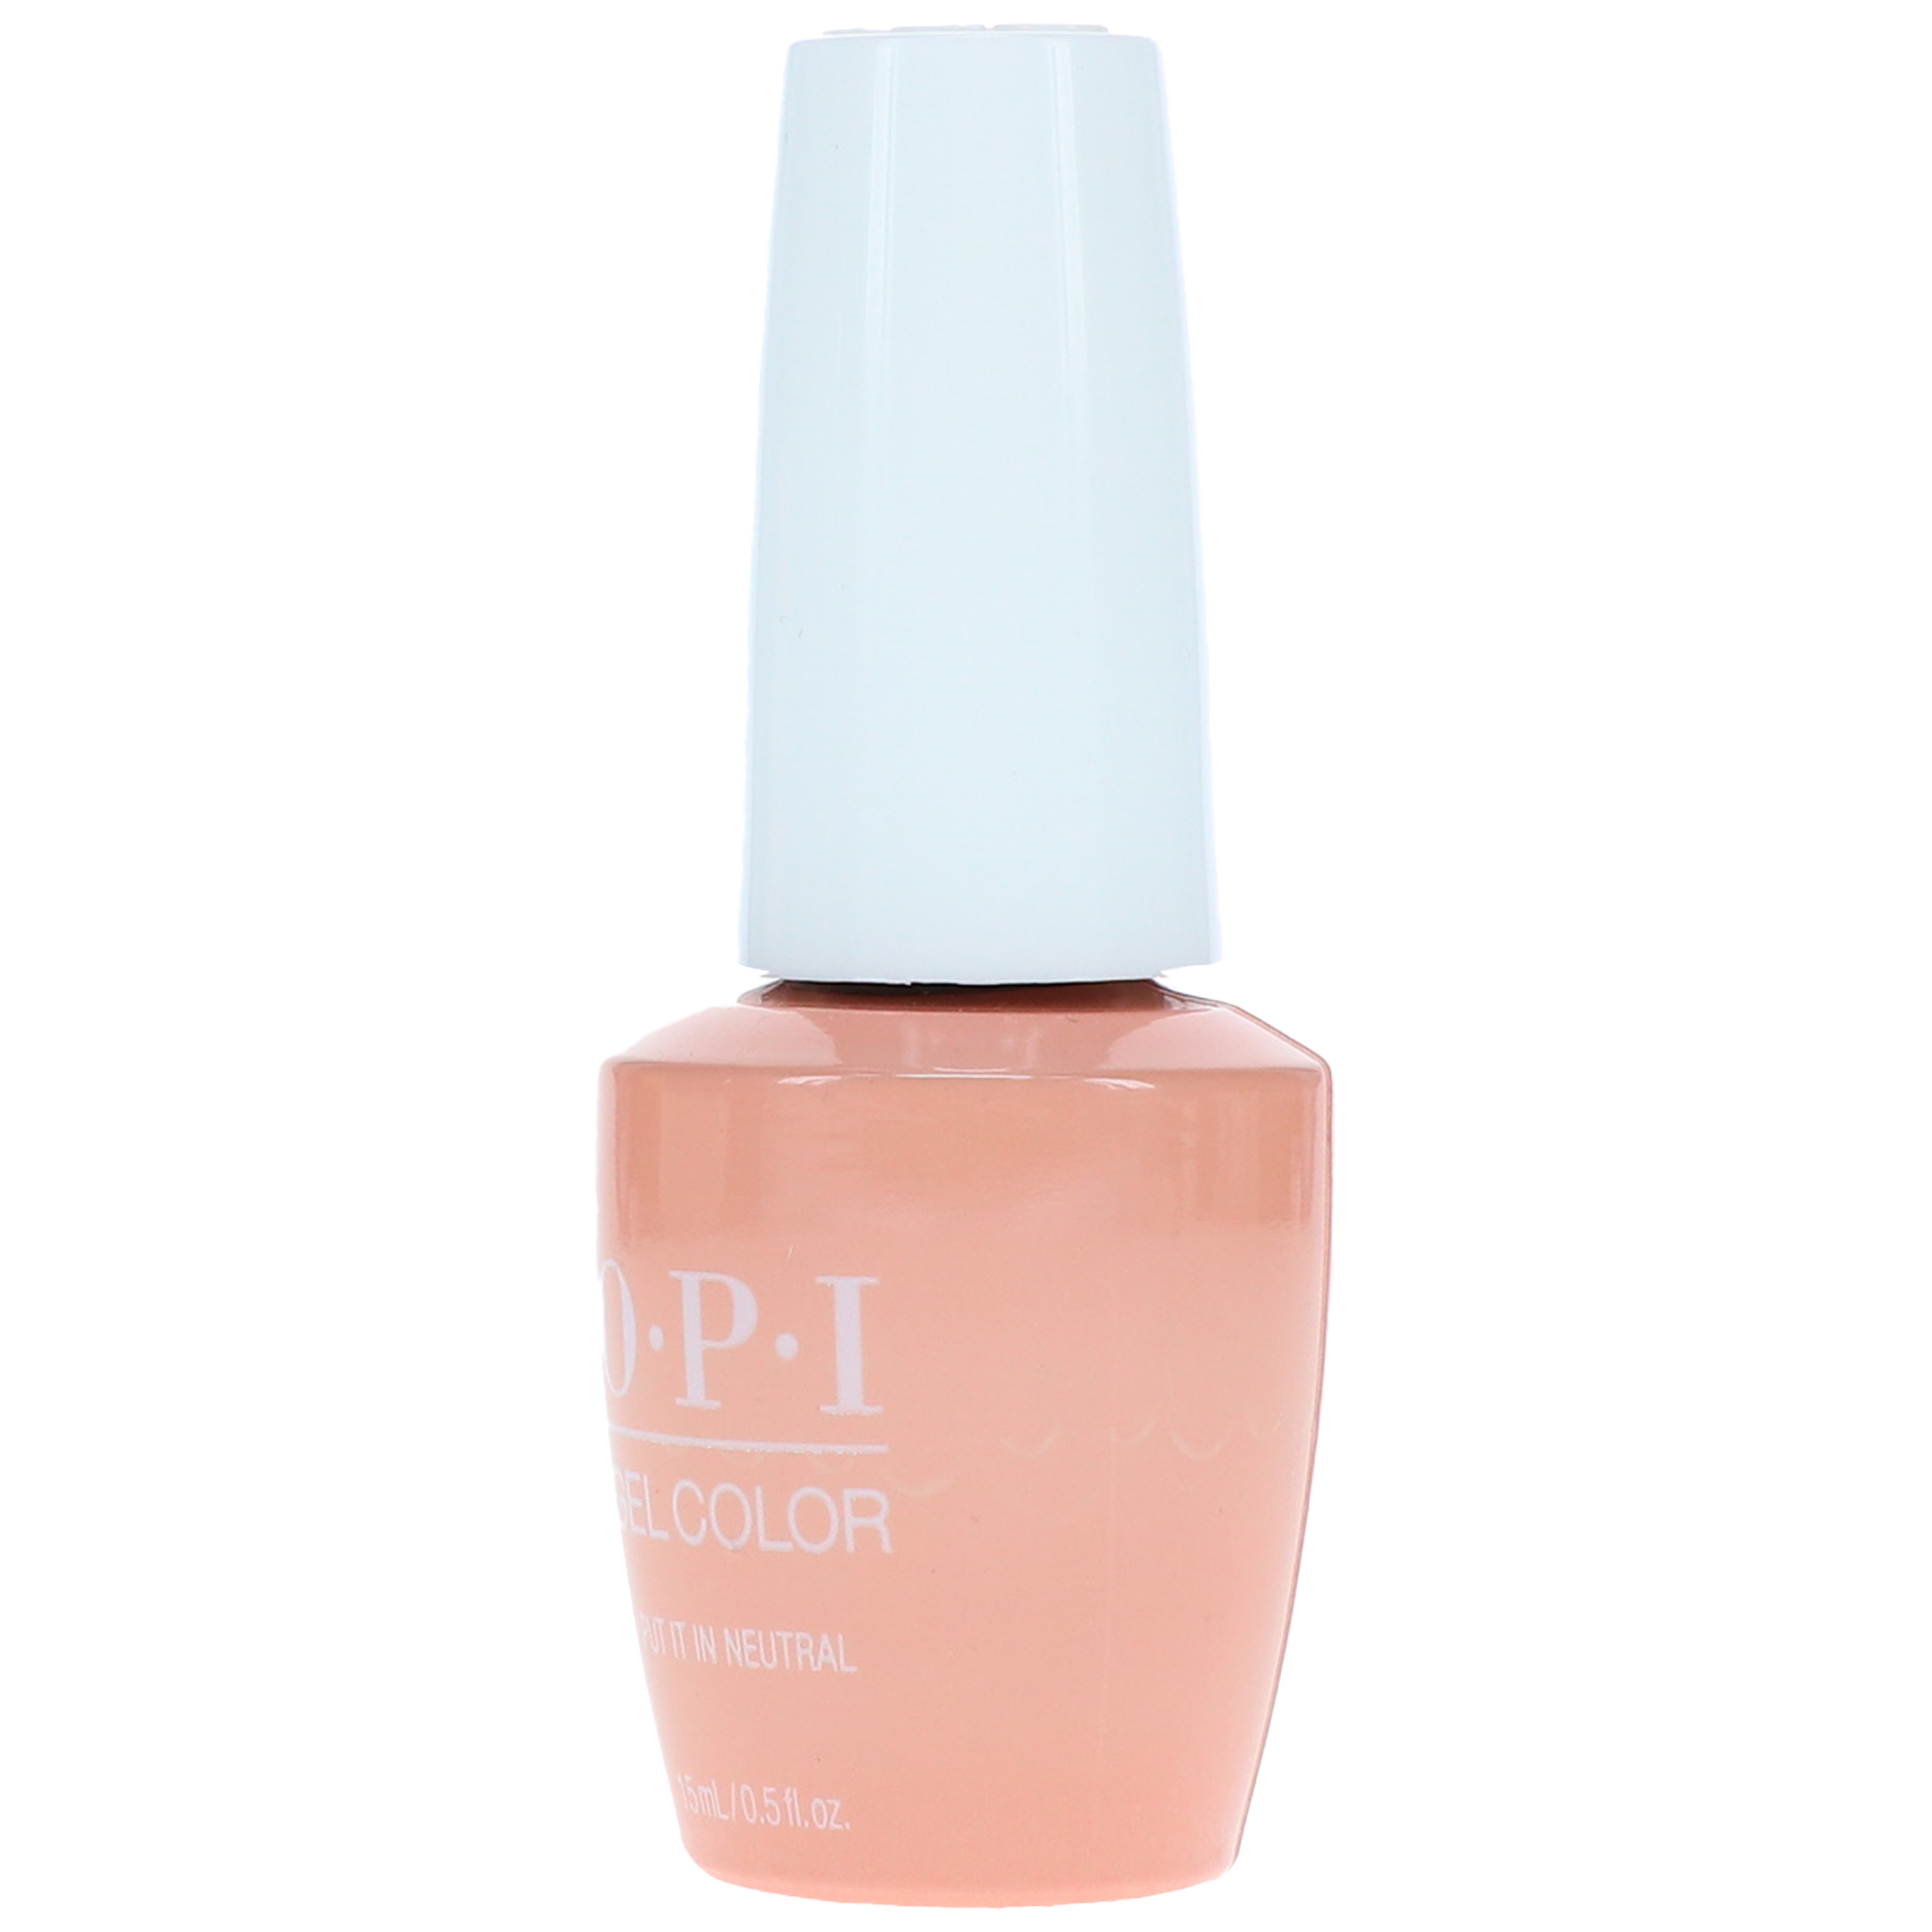 OPI Gelcolor Put It In Neautral 0.5 Fl Oz - image 3 of 3